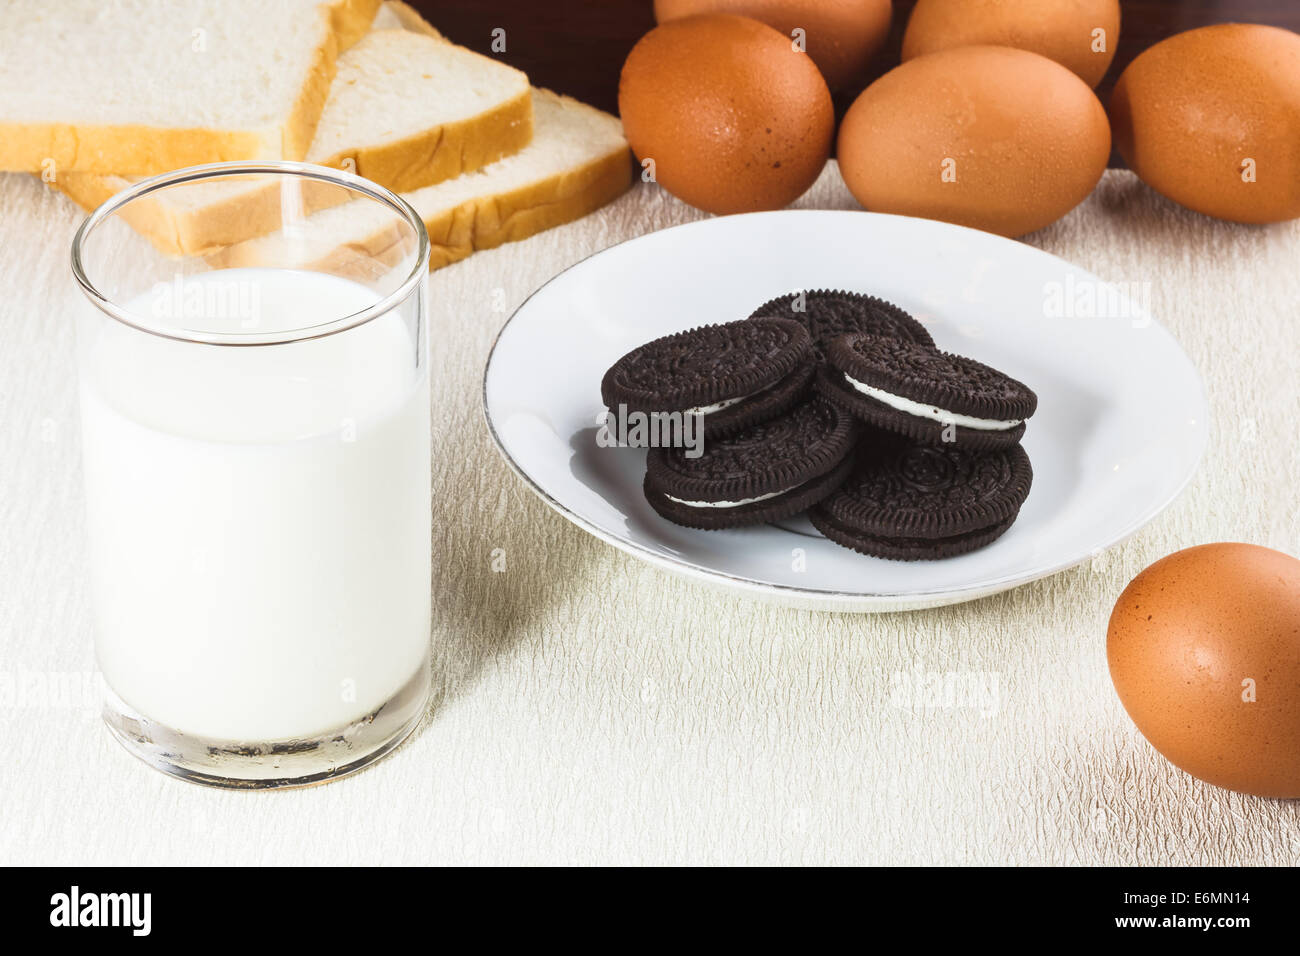 Healthy eating with fresh milk, chocolate cookies, eggs and bread Stock Photo